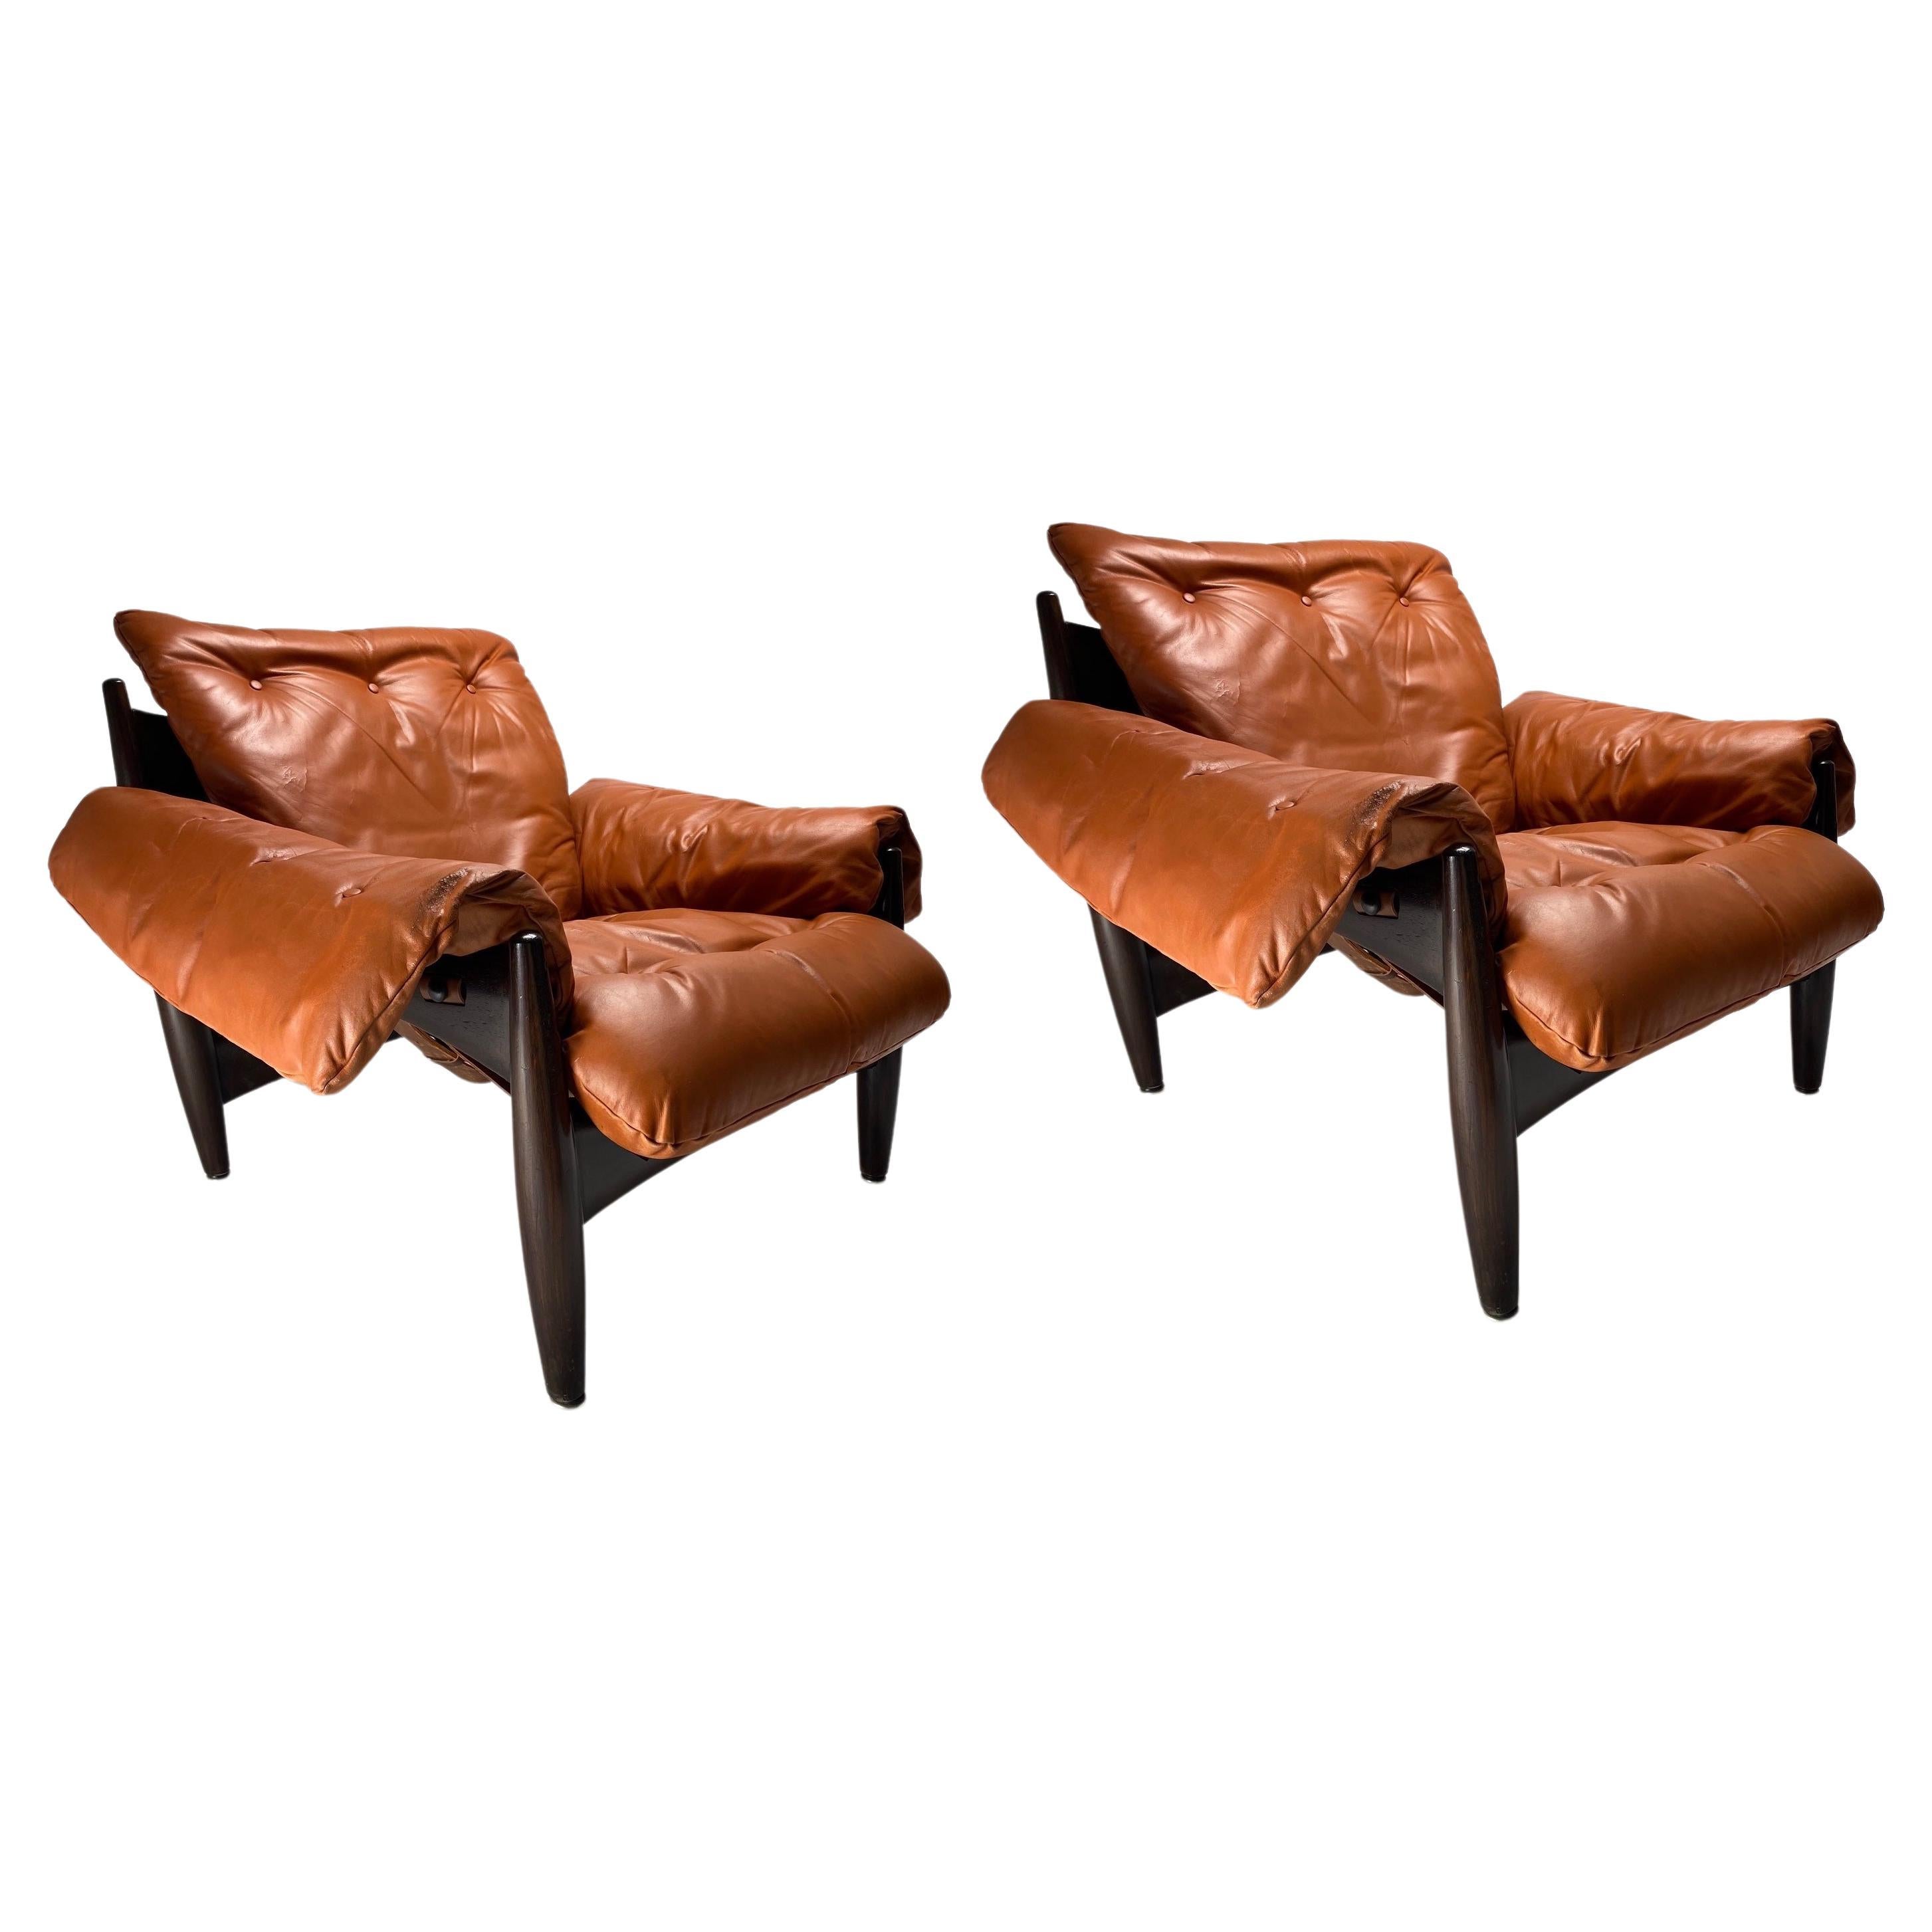 Midcentury Modern Sergio Rodrigues "Sheriff" Lounge Chairs, Brazil For Sale